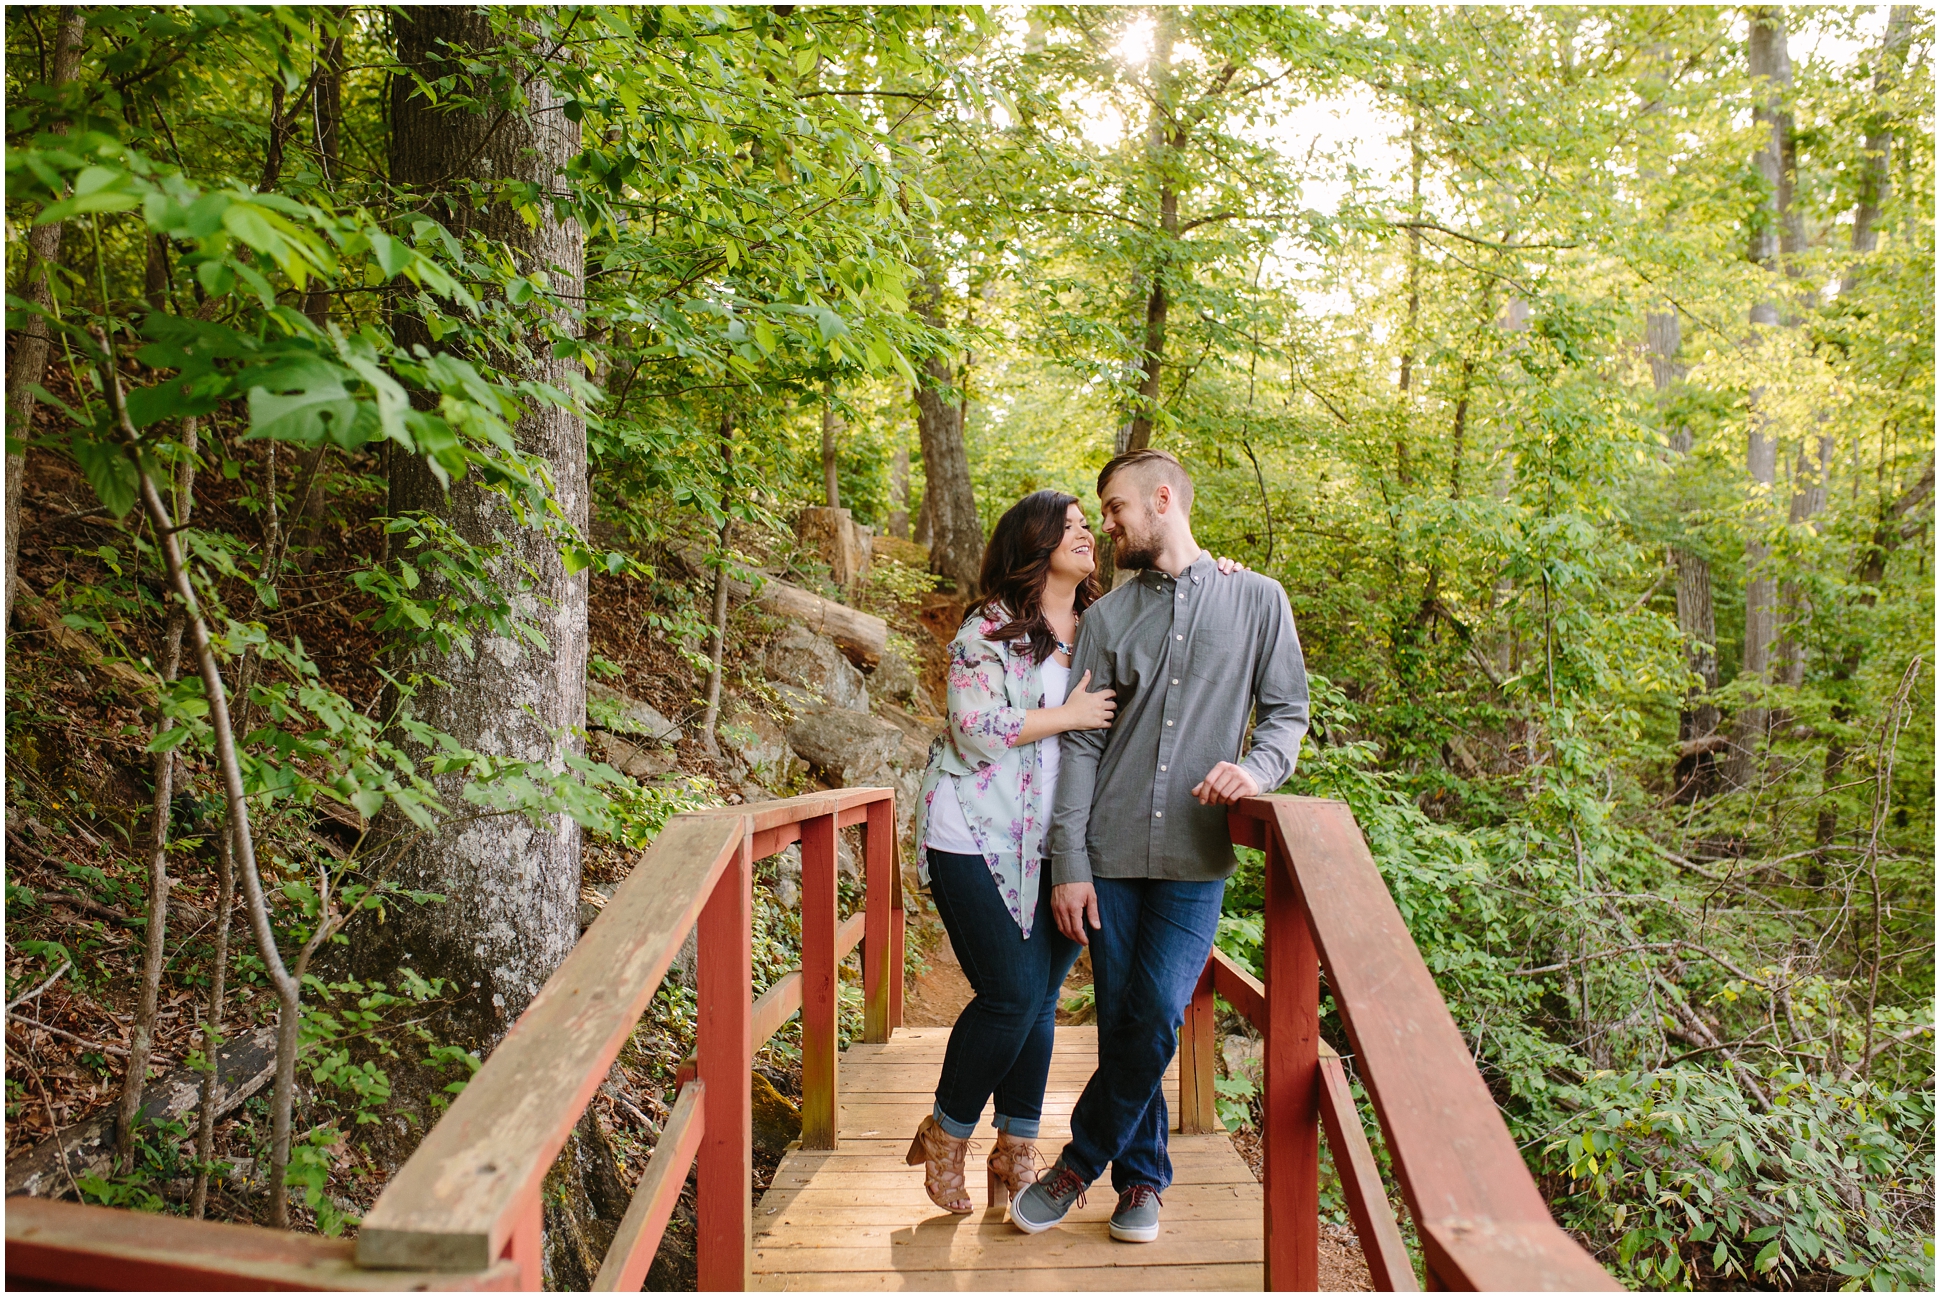 Two Chics Photography | A High Falls State Park Engagement Session | www.twochicsphotography.com